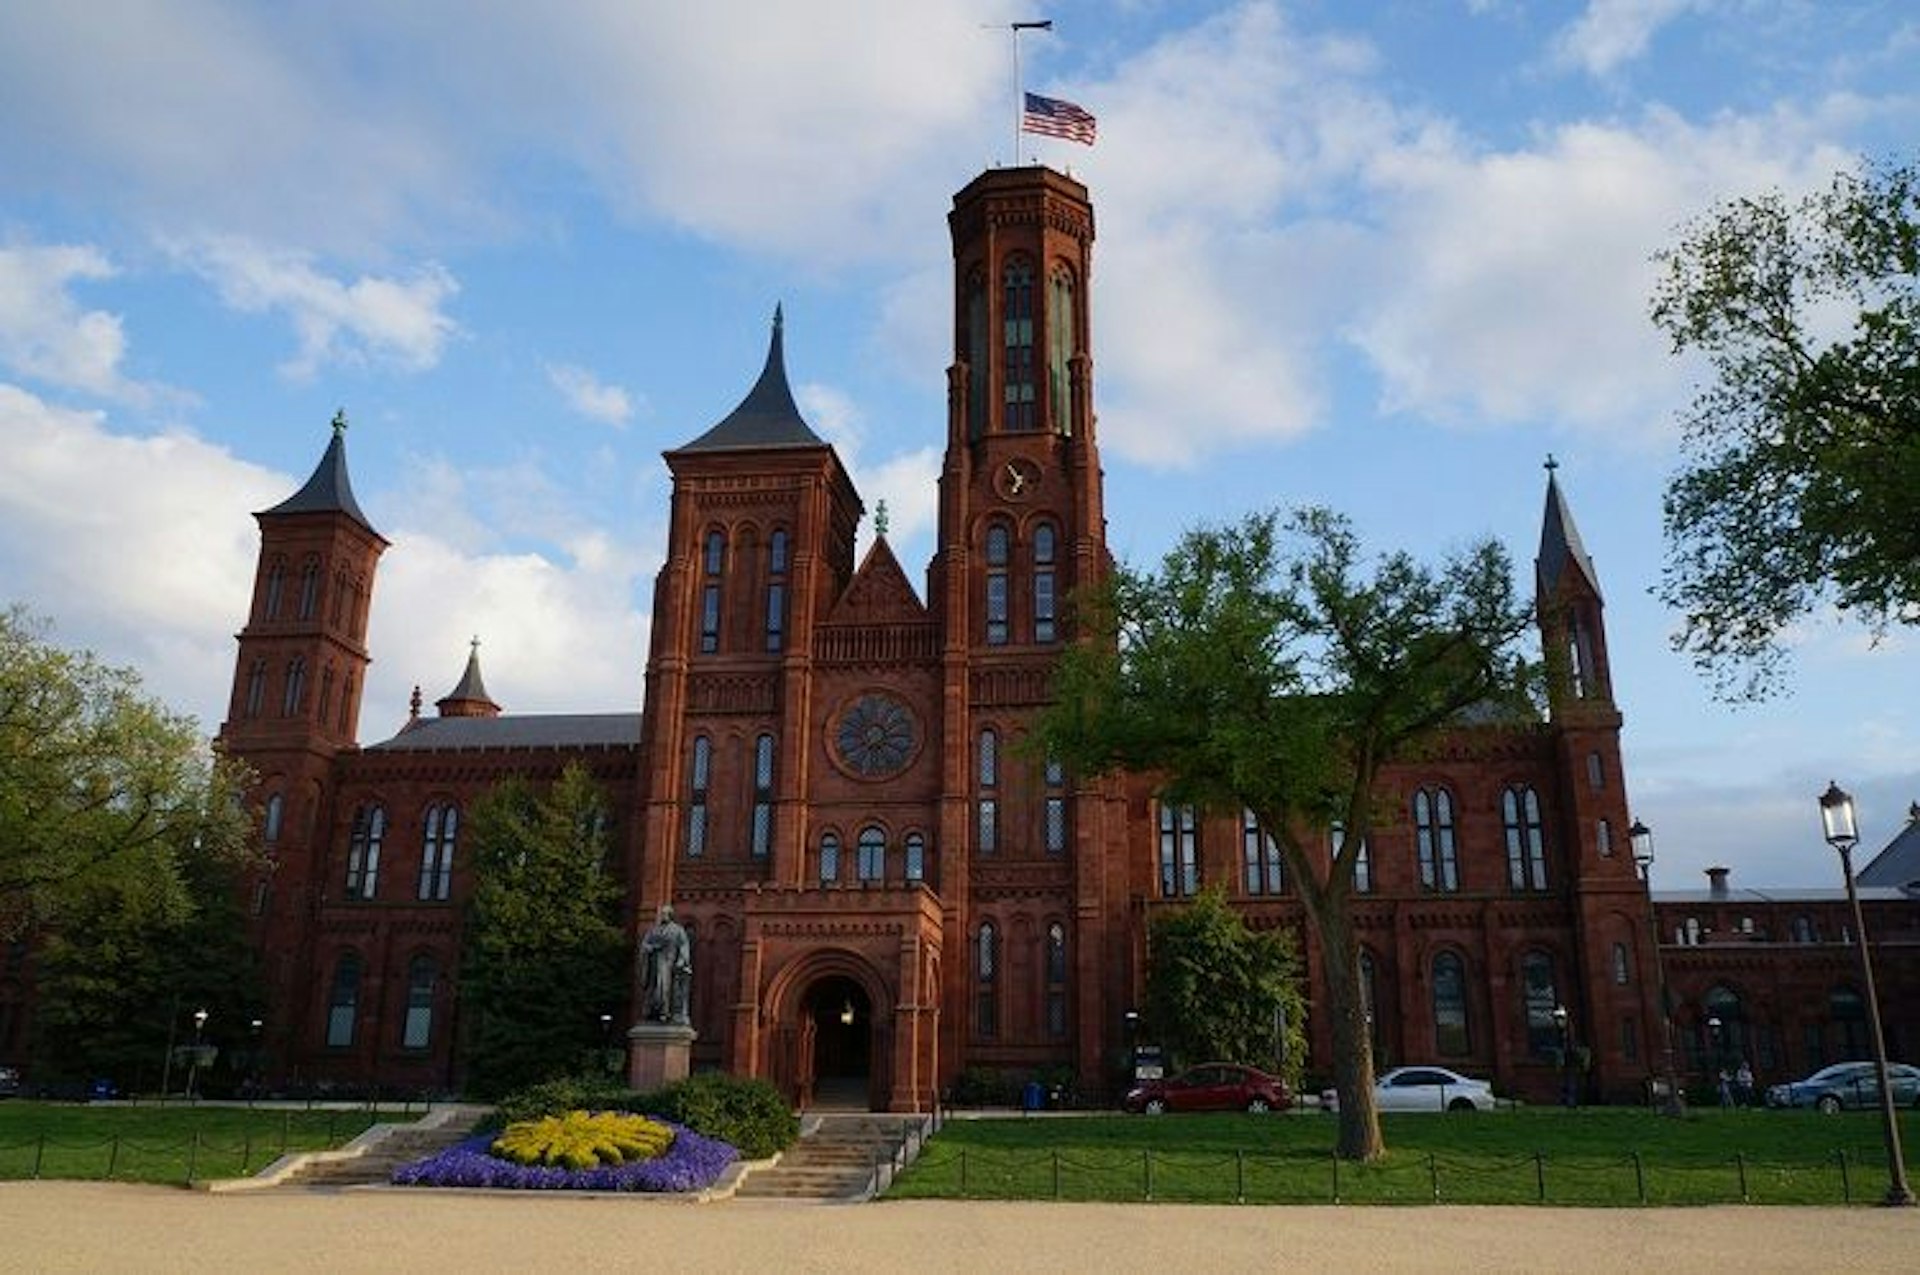 The Smithsonian Castle. Image by Leandro Neumann Ciuffo / CC BY 2.0.